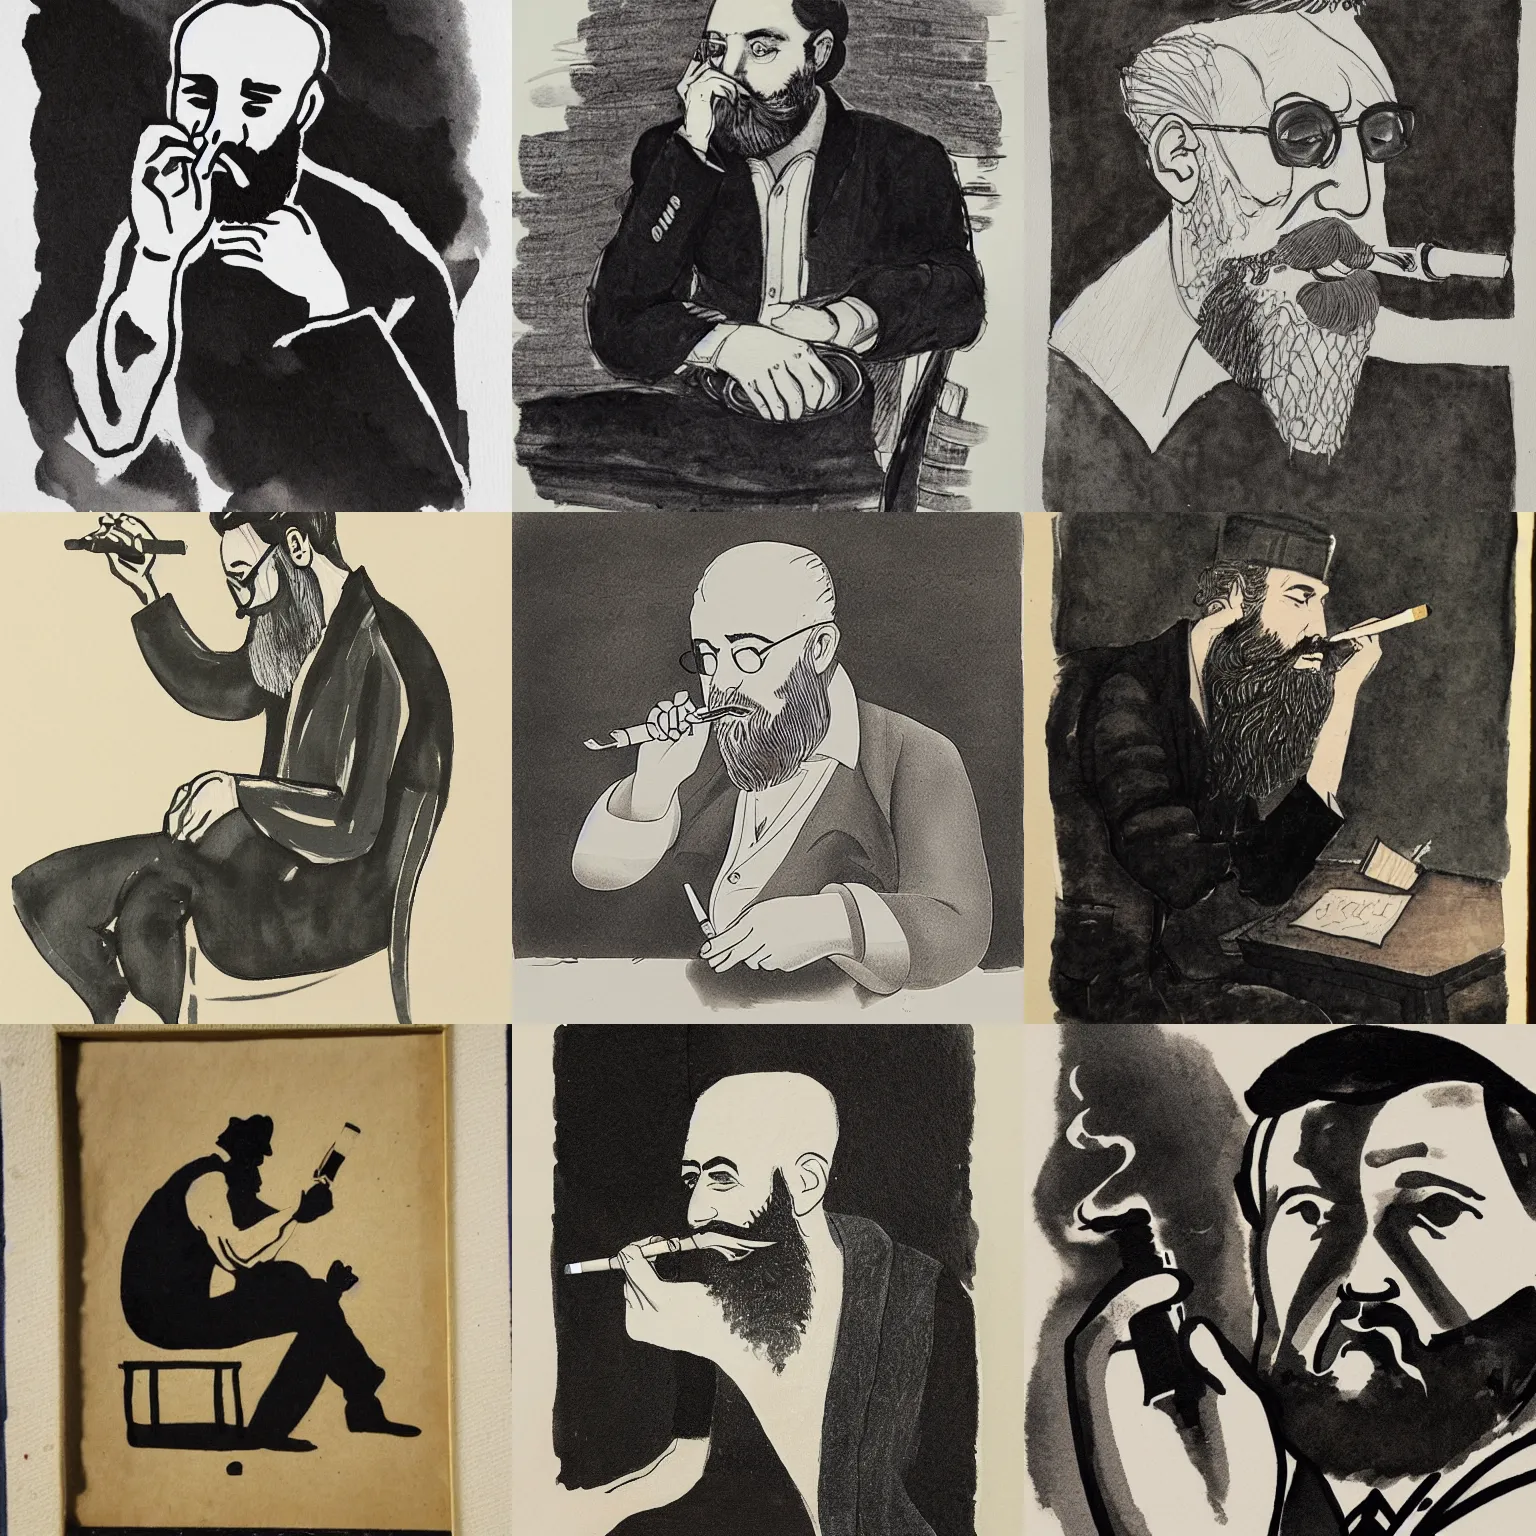 Prompt: ink painting of a writer with a beard sitting, he is smoking a cigarette, he is holding a bottle in his other hand